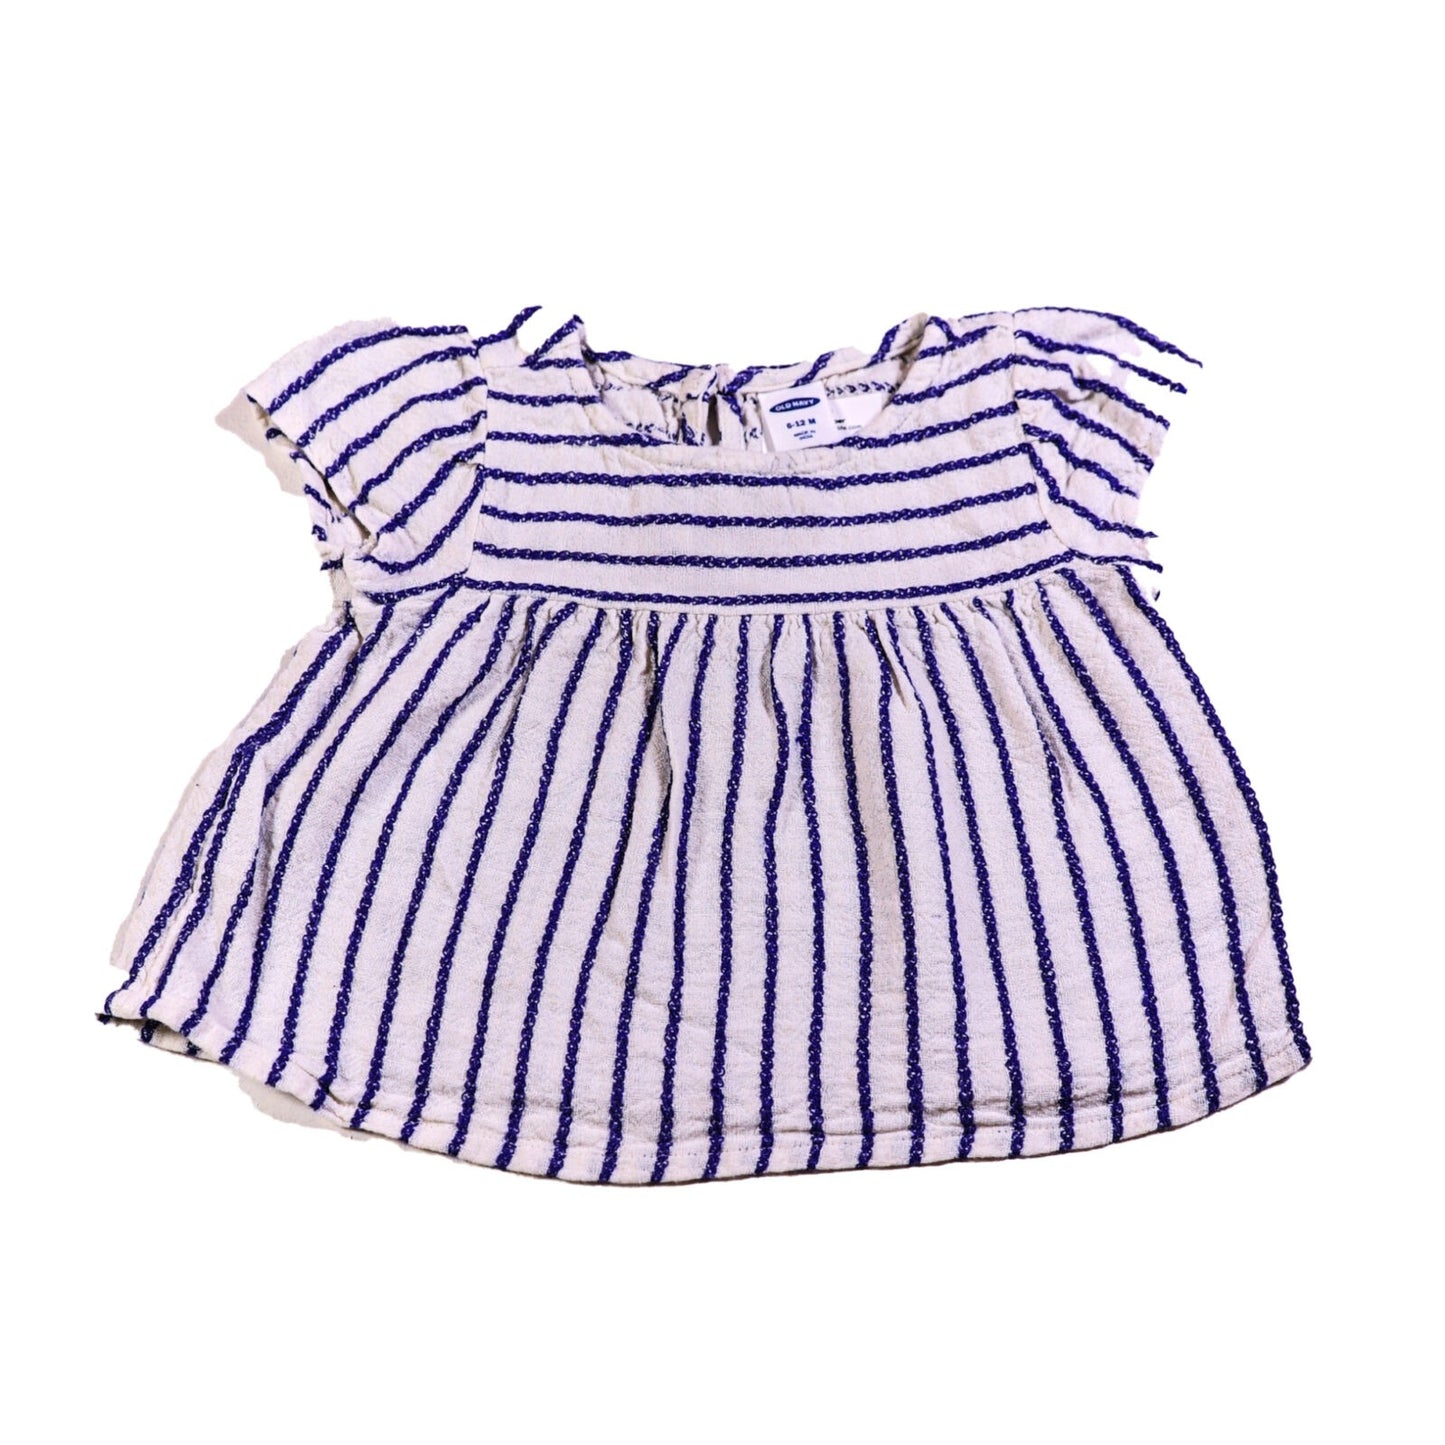 Cotton woven striped top with cap sleeves